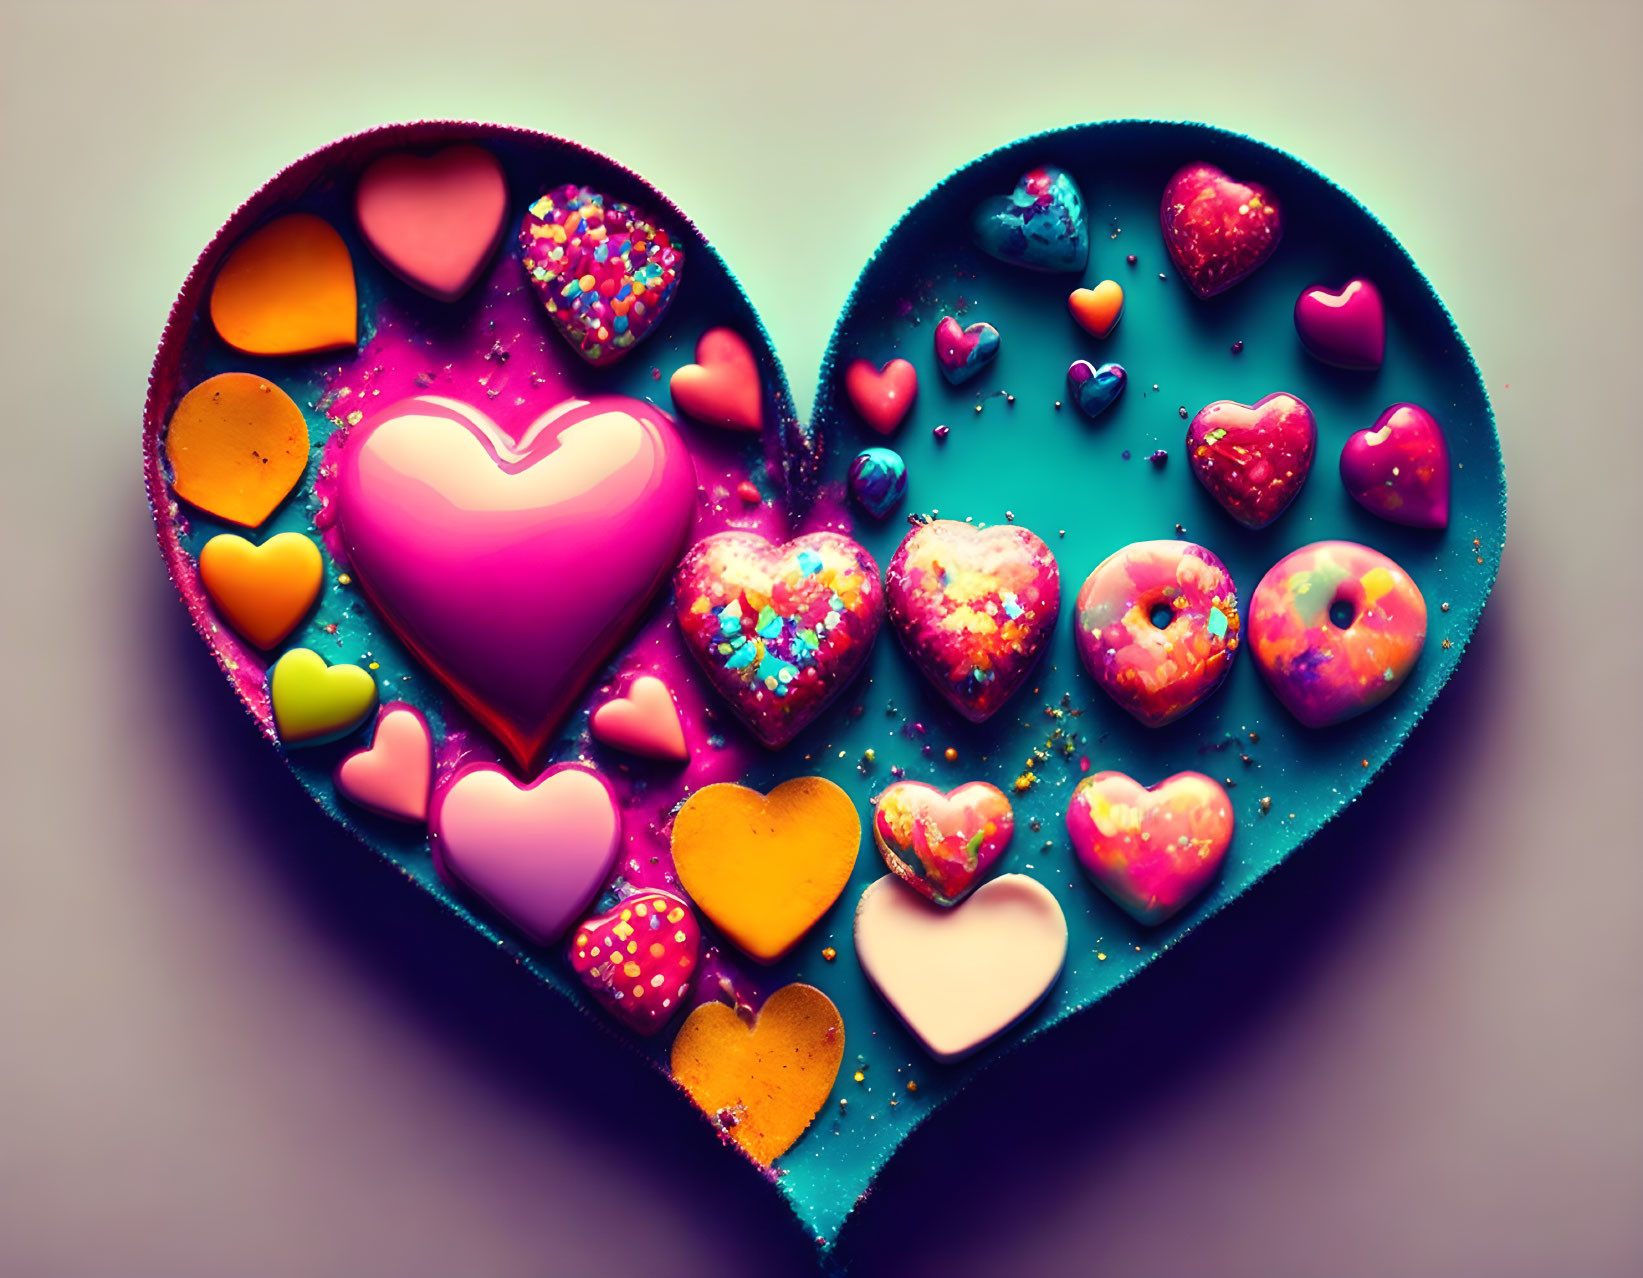 Heart-shaped objects and candies in vibrant colors for Valentine's Day